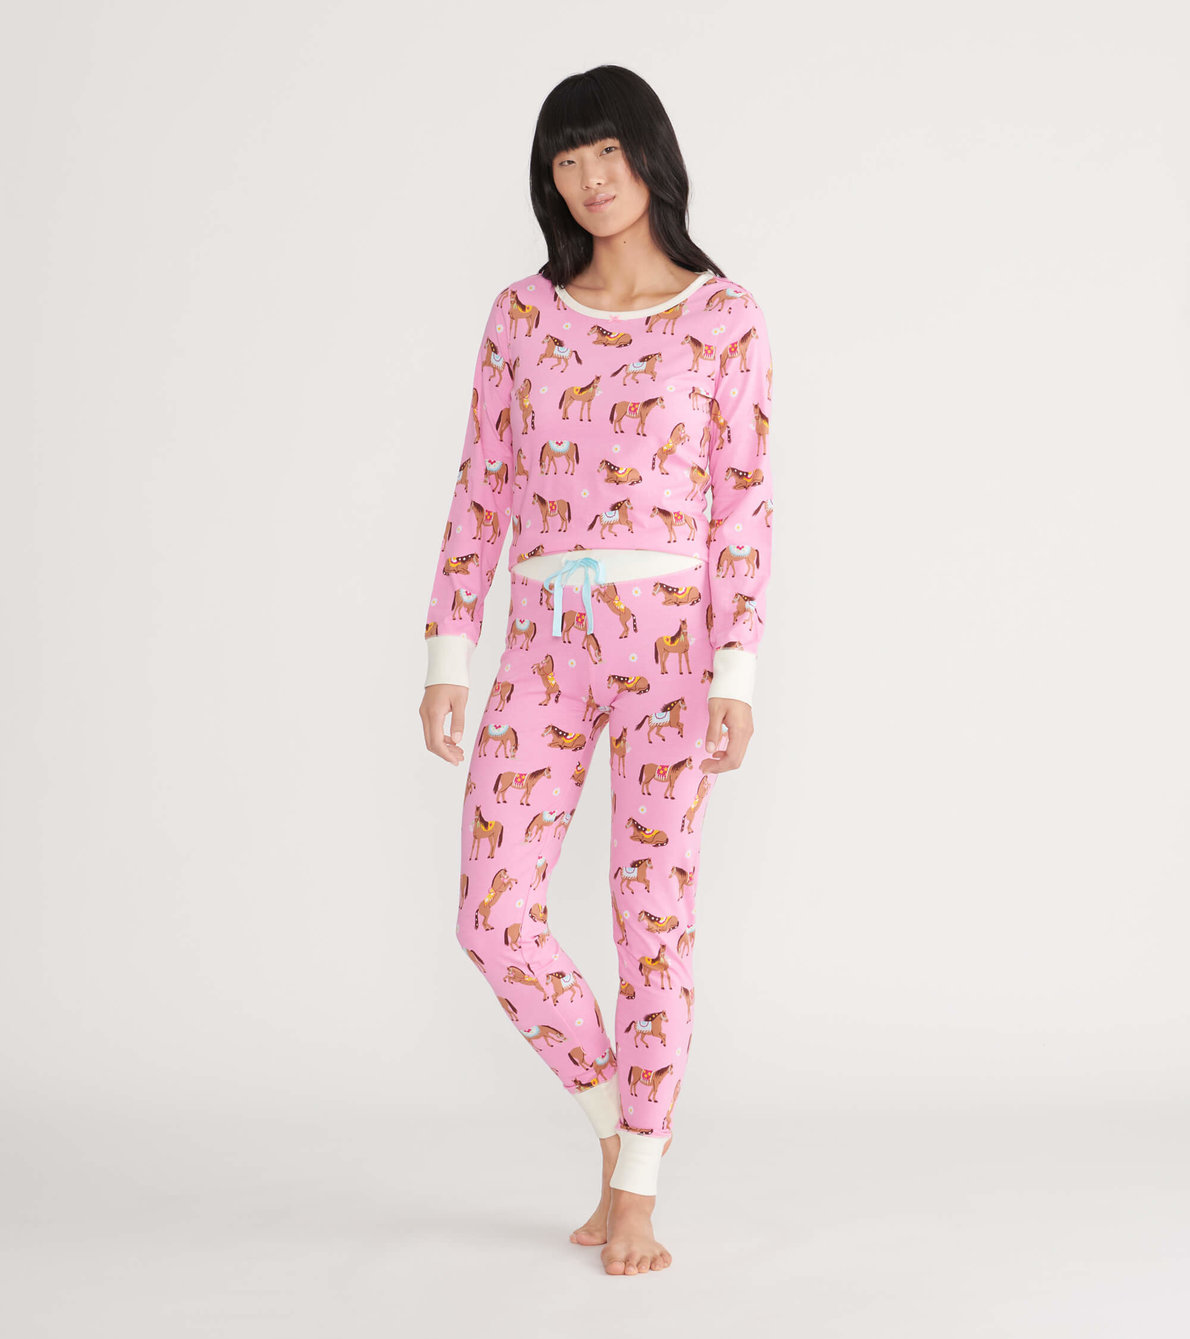 View larger image of Country Horses Women's Jersey Pajama Set